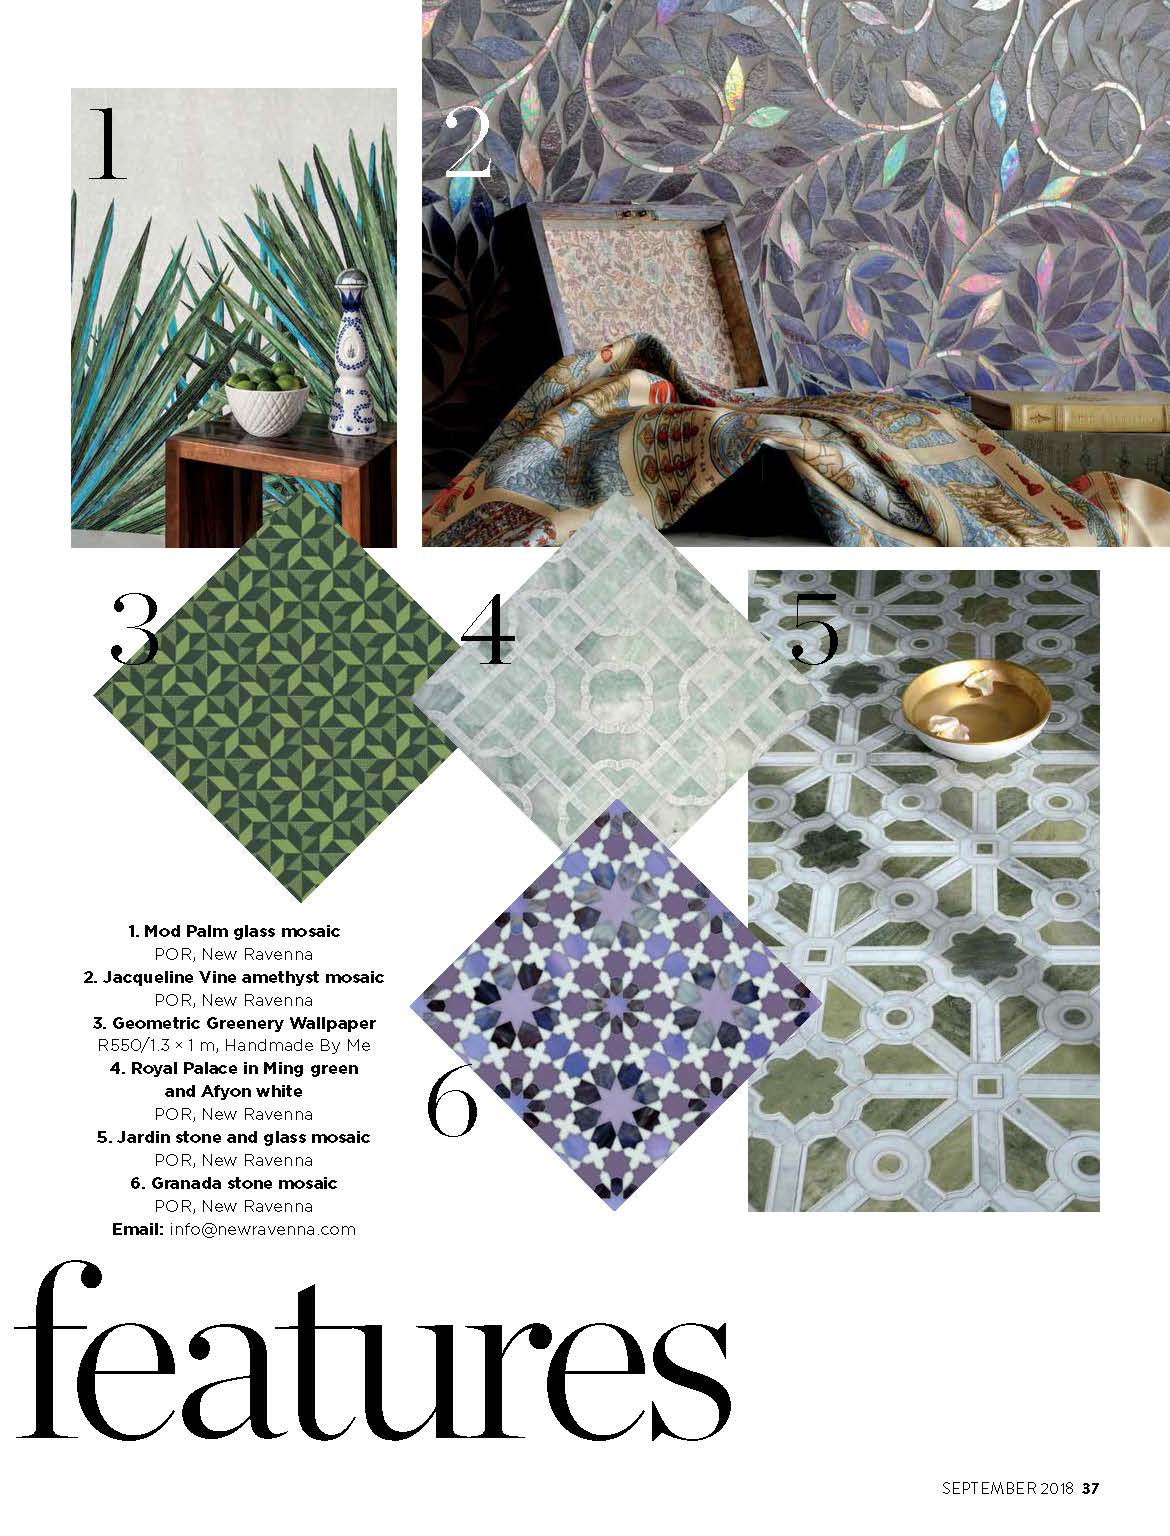 Mod Palm glass mosaic designed by Joni Vanderslice for New Ravenna featured in Club Magazine